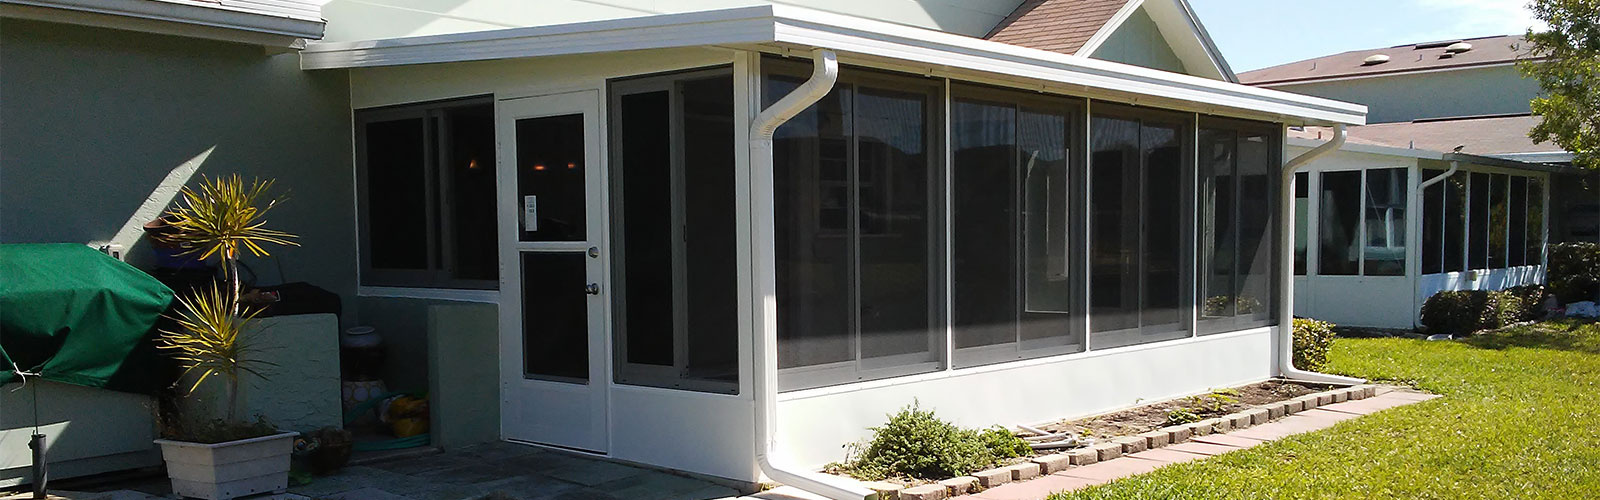 Exterior of Residential Acrylic Patio Room